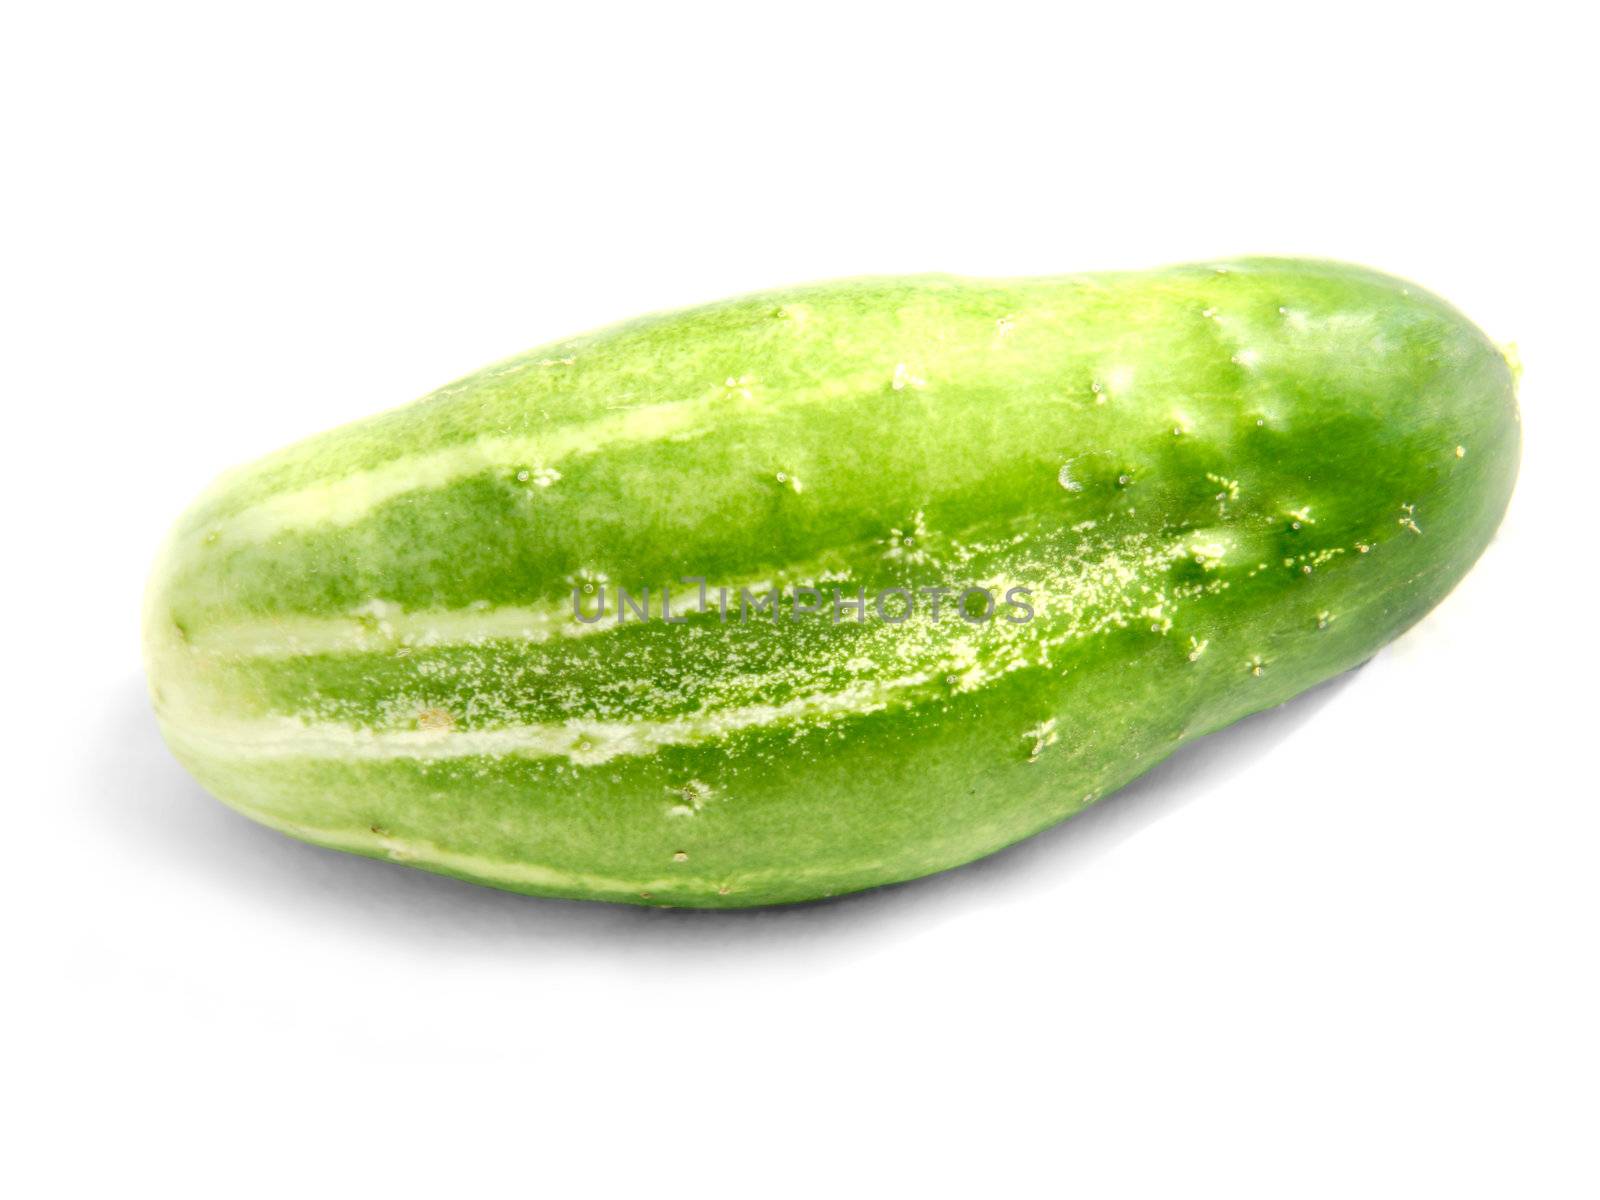 Green cucumber, isolated on white.